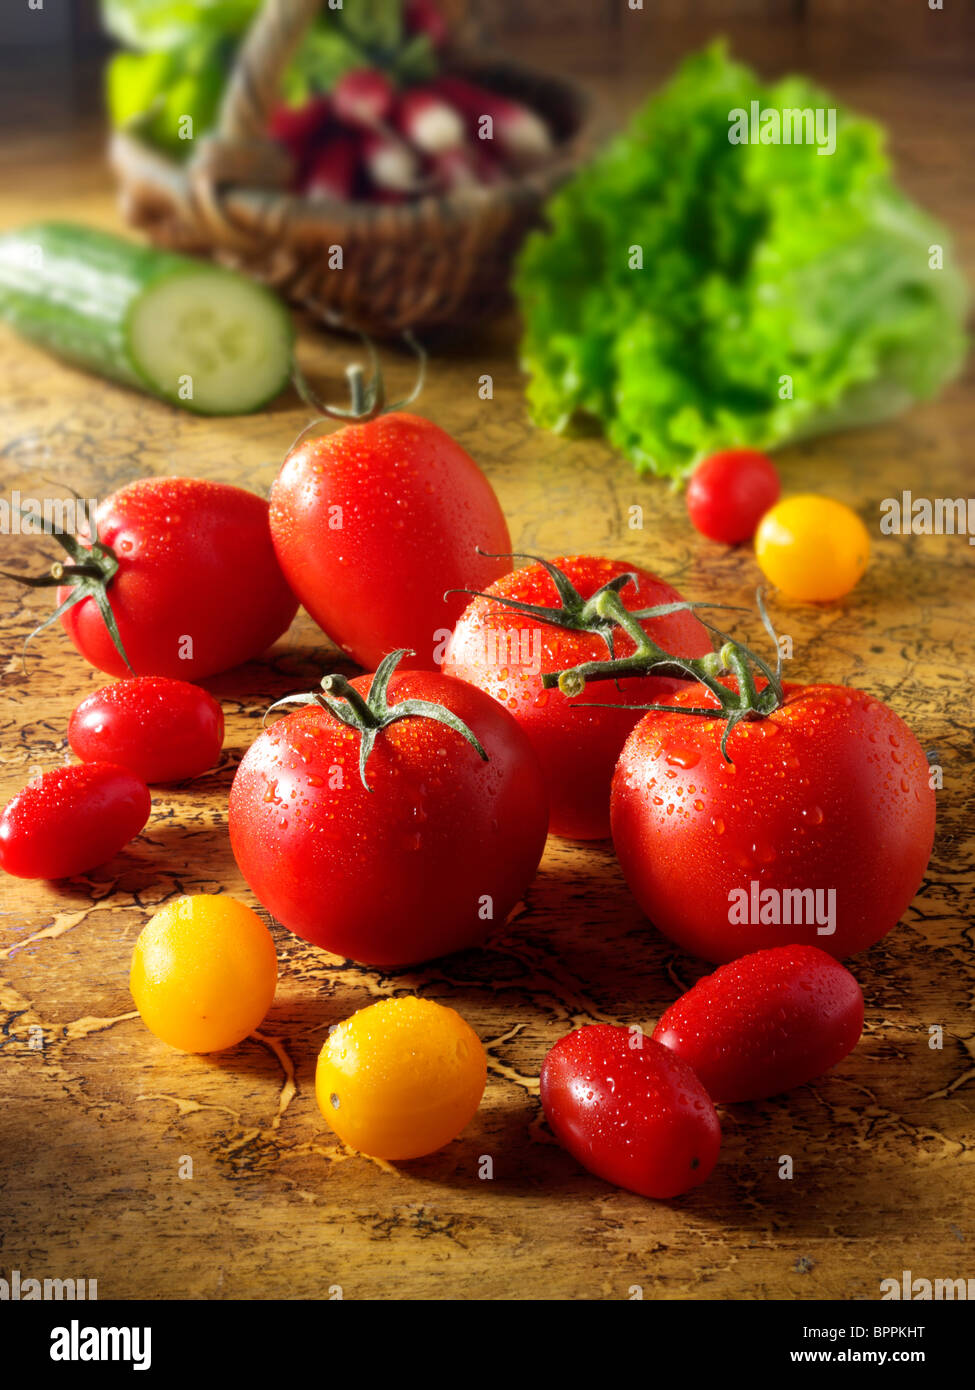 Mixed tomatoes photos, pictures & images Stock Photo